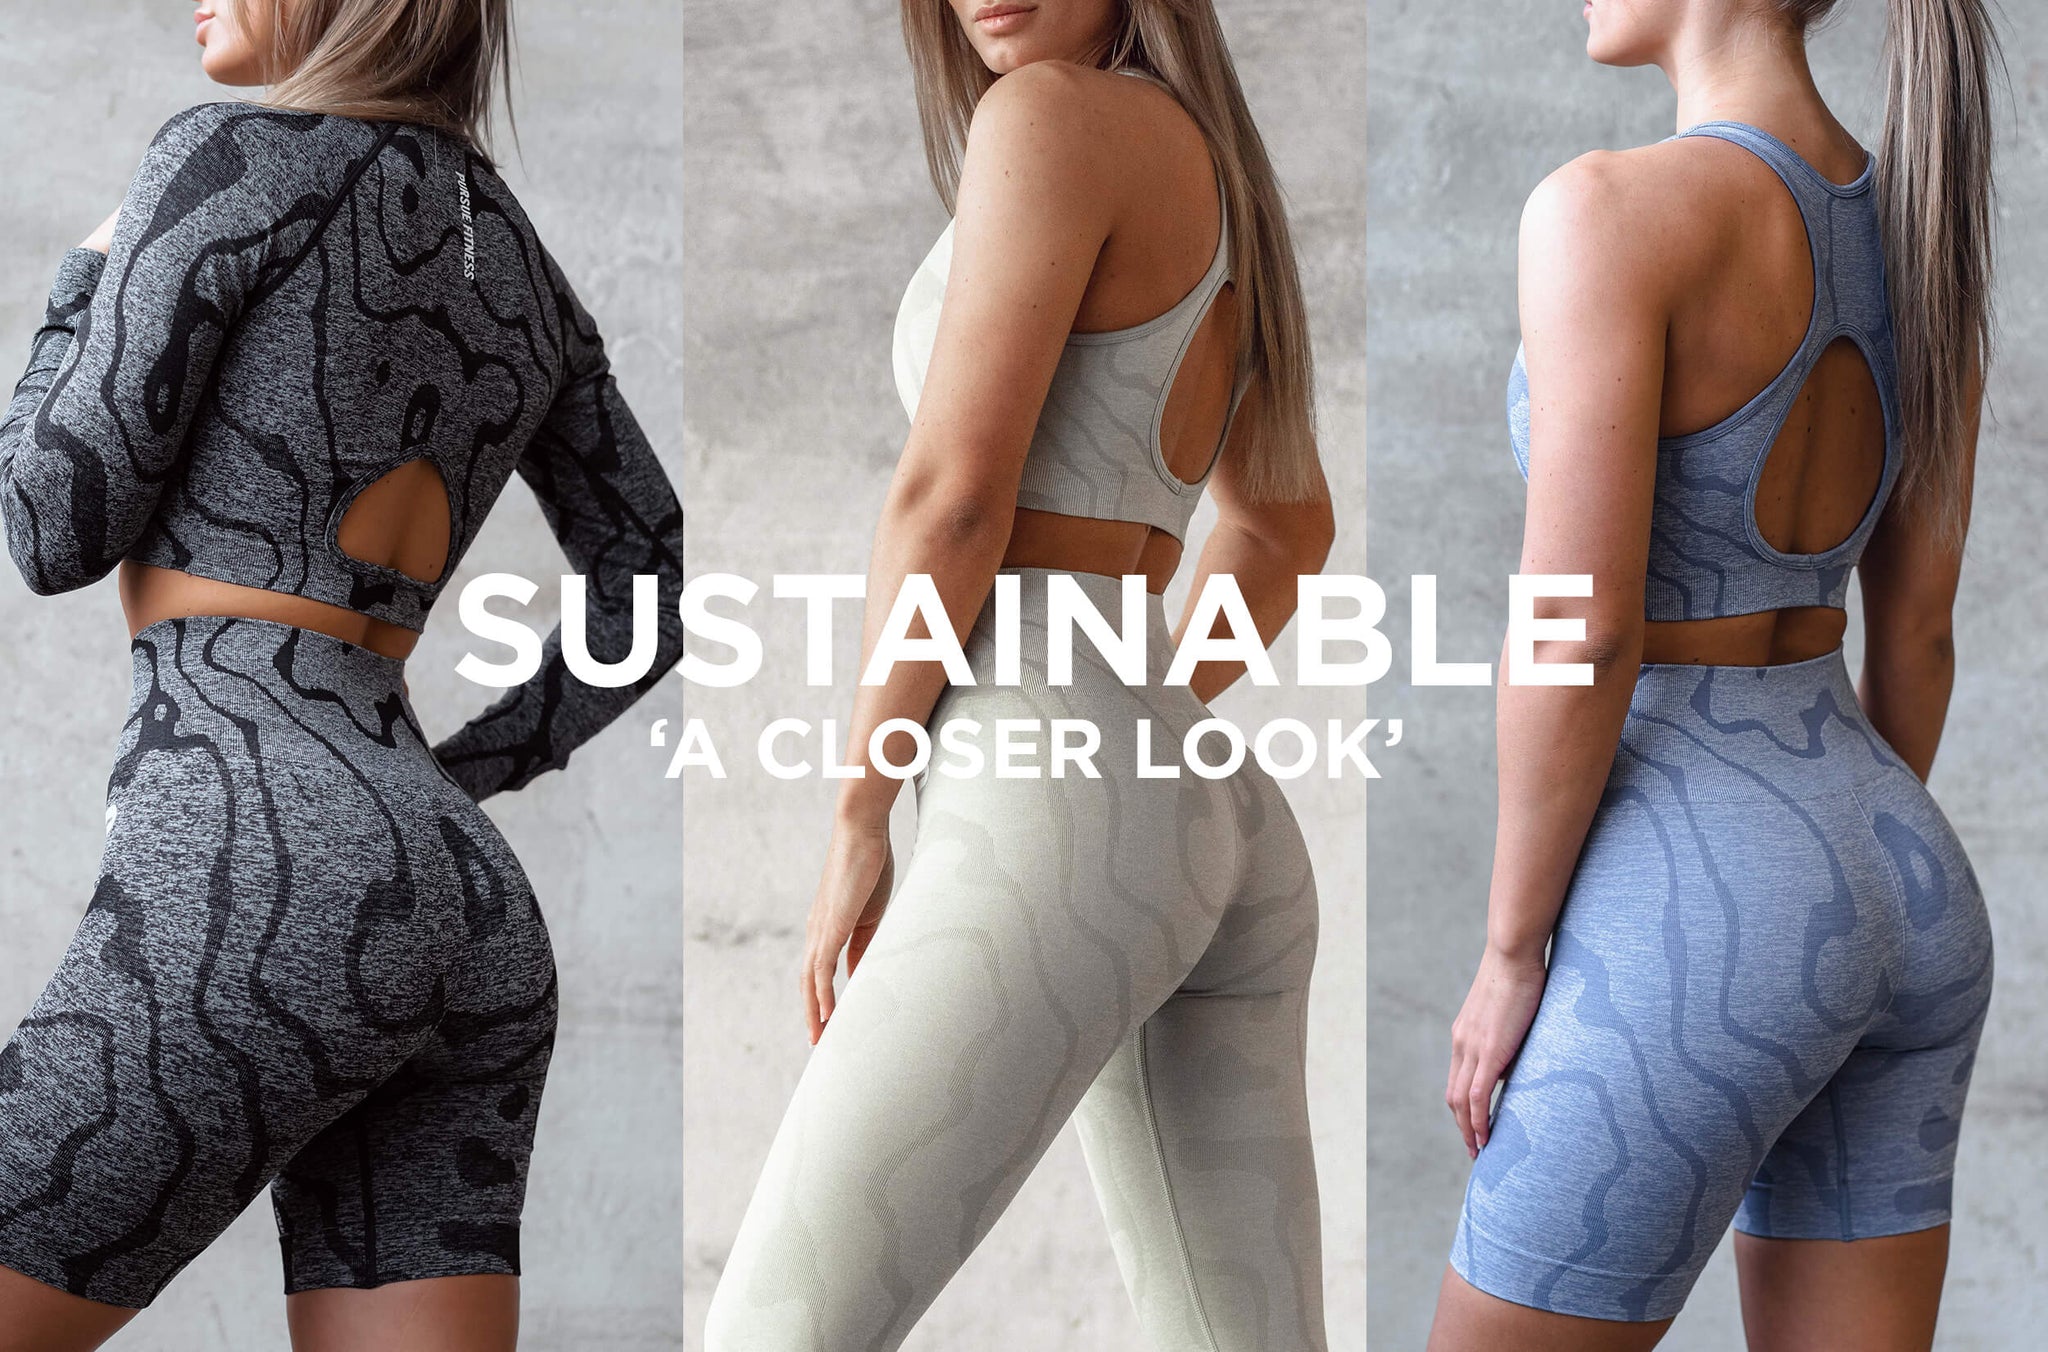 Black, Sage Green & Blue coloured Sustainable Seamless Gym wear for Women